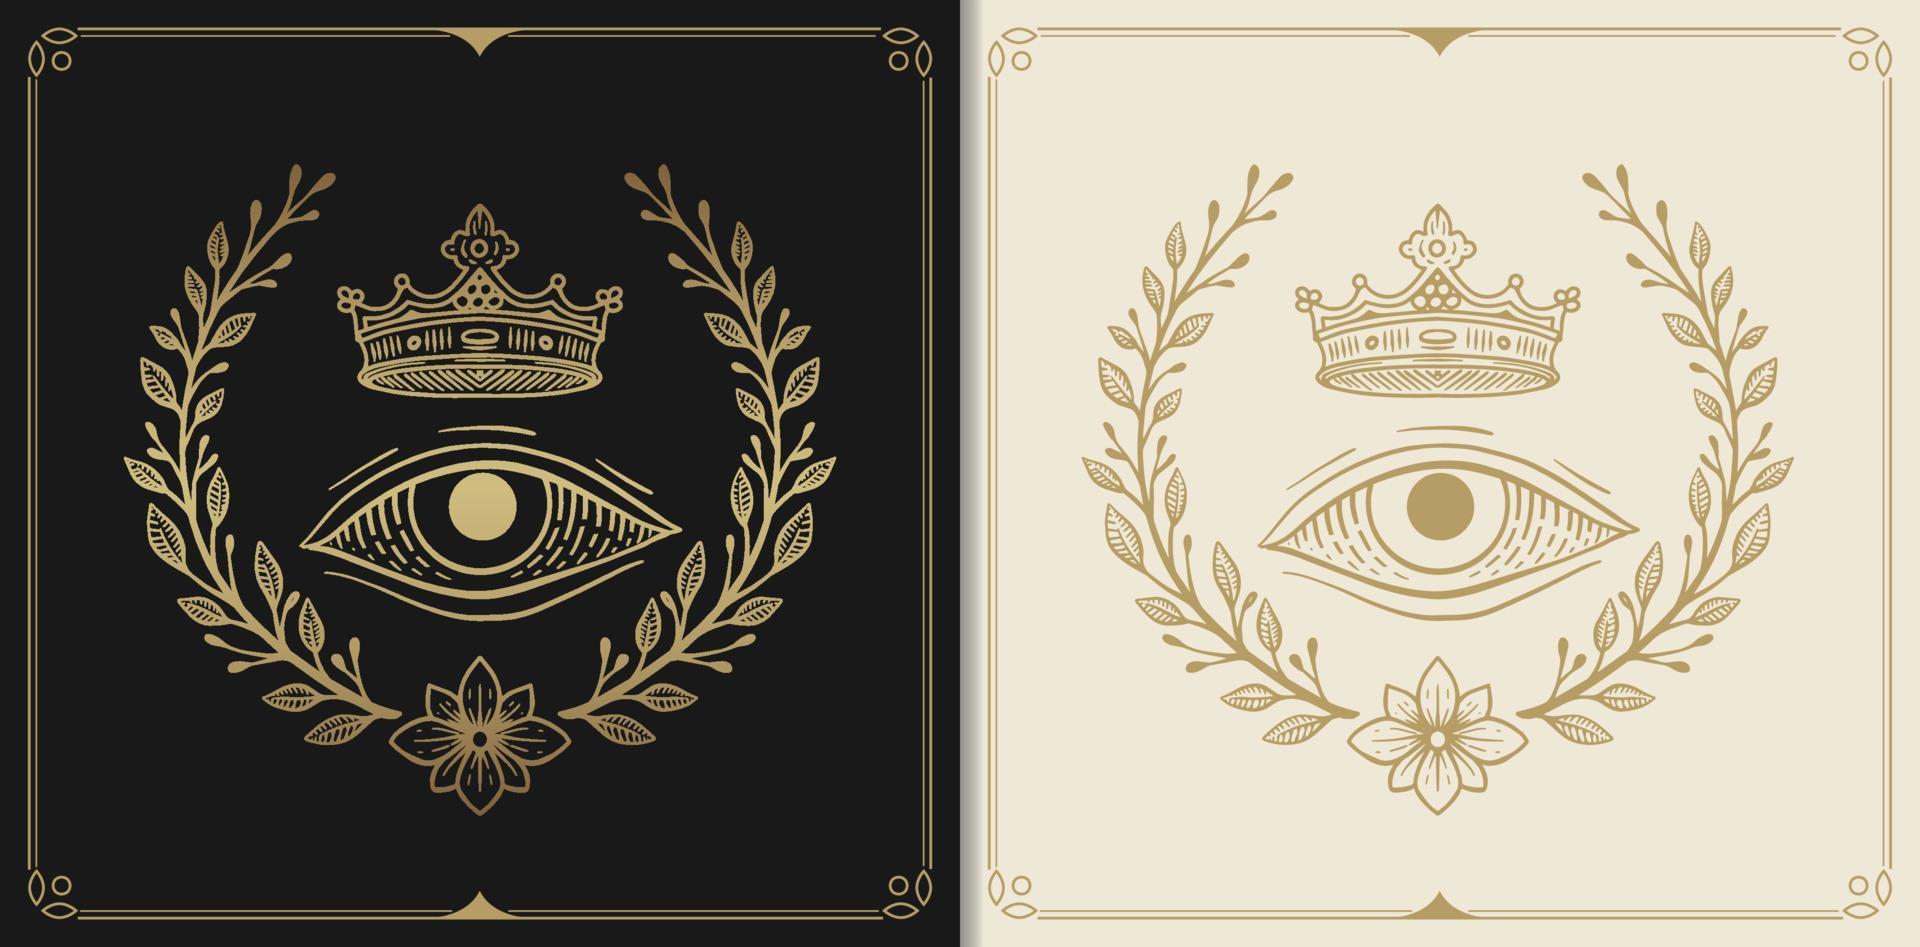 Royal symbol, eye, crown with engraving, hand drawn, luxury, celestial, esoteric, boho style, fit for spiritualist, religious, paranormal, tarot reader, astrologer or tattoo vector